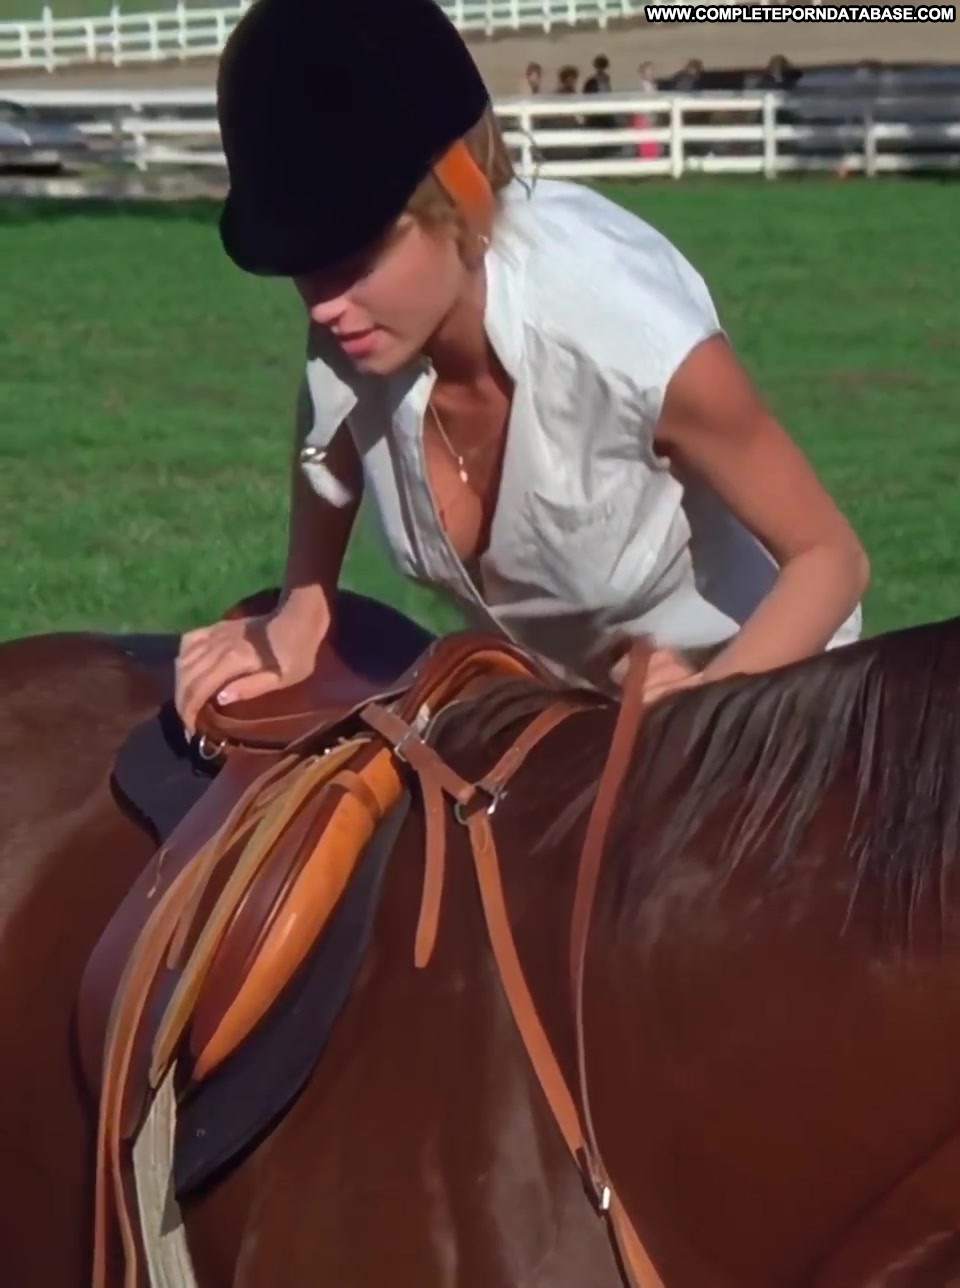 Betsy Russell Horse Porn - Betsy Russell Xxx Influencer Private School Straight Private Porn Sex -  Complete Porn Database Pictures